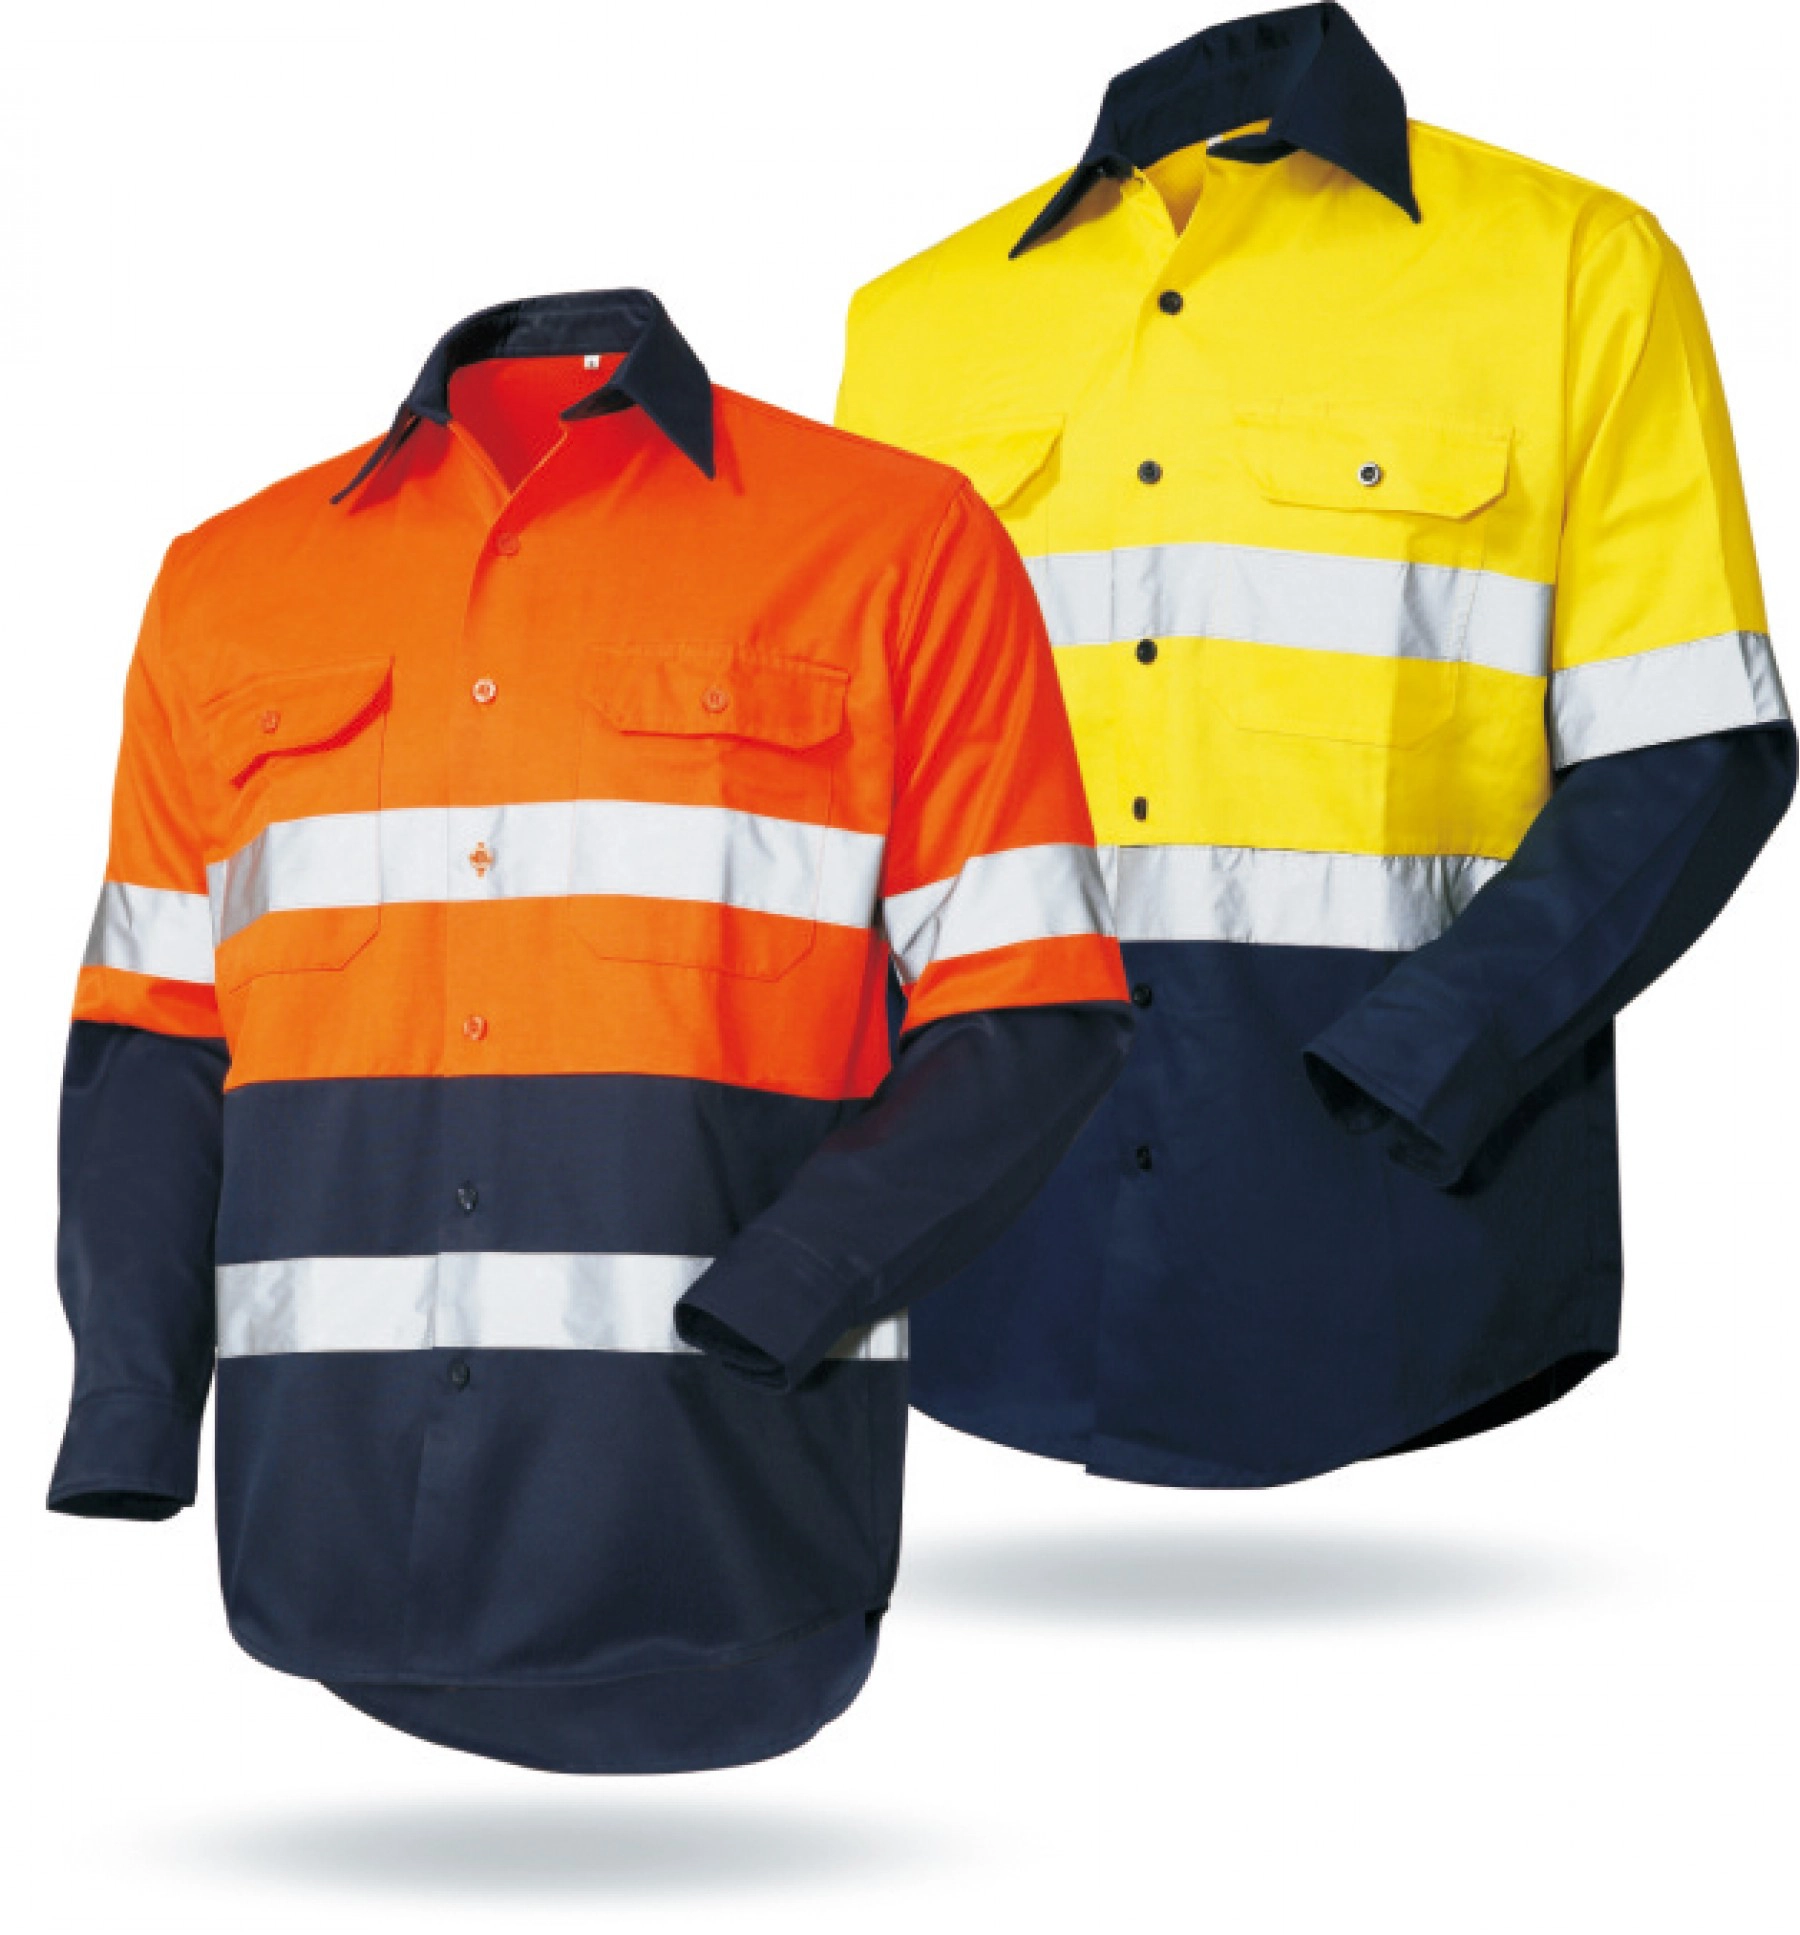 Reflective Safety Vest With Logo from Bangladesh Garments Manufacturer